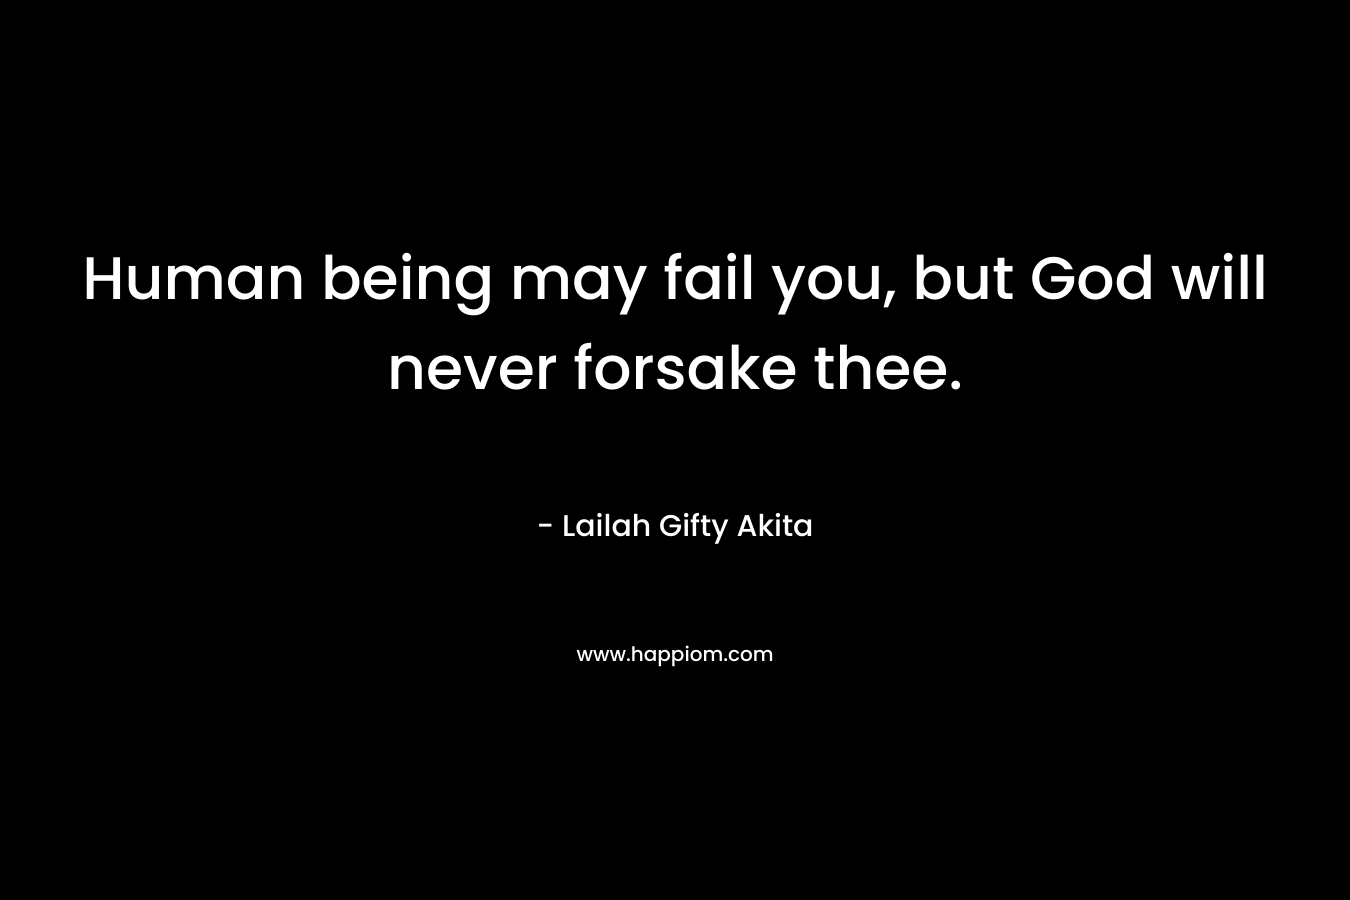 Human being may fail you, but God will never forsake thee.